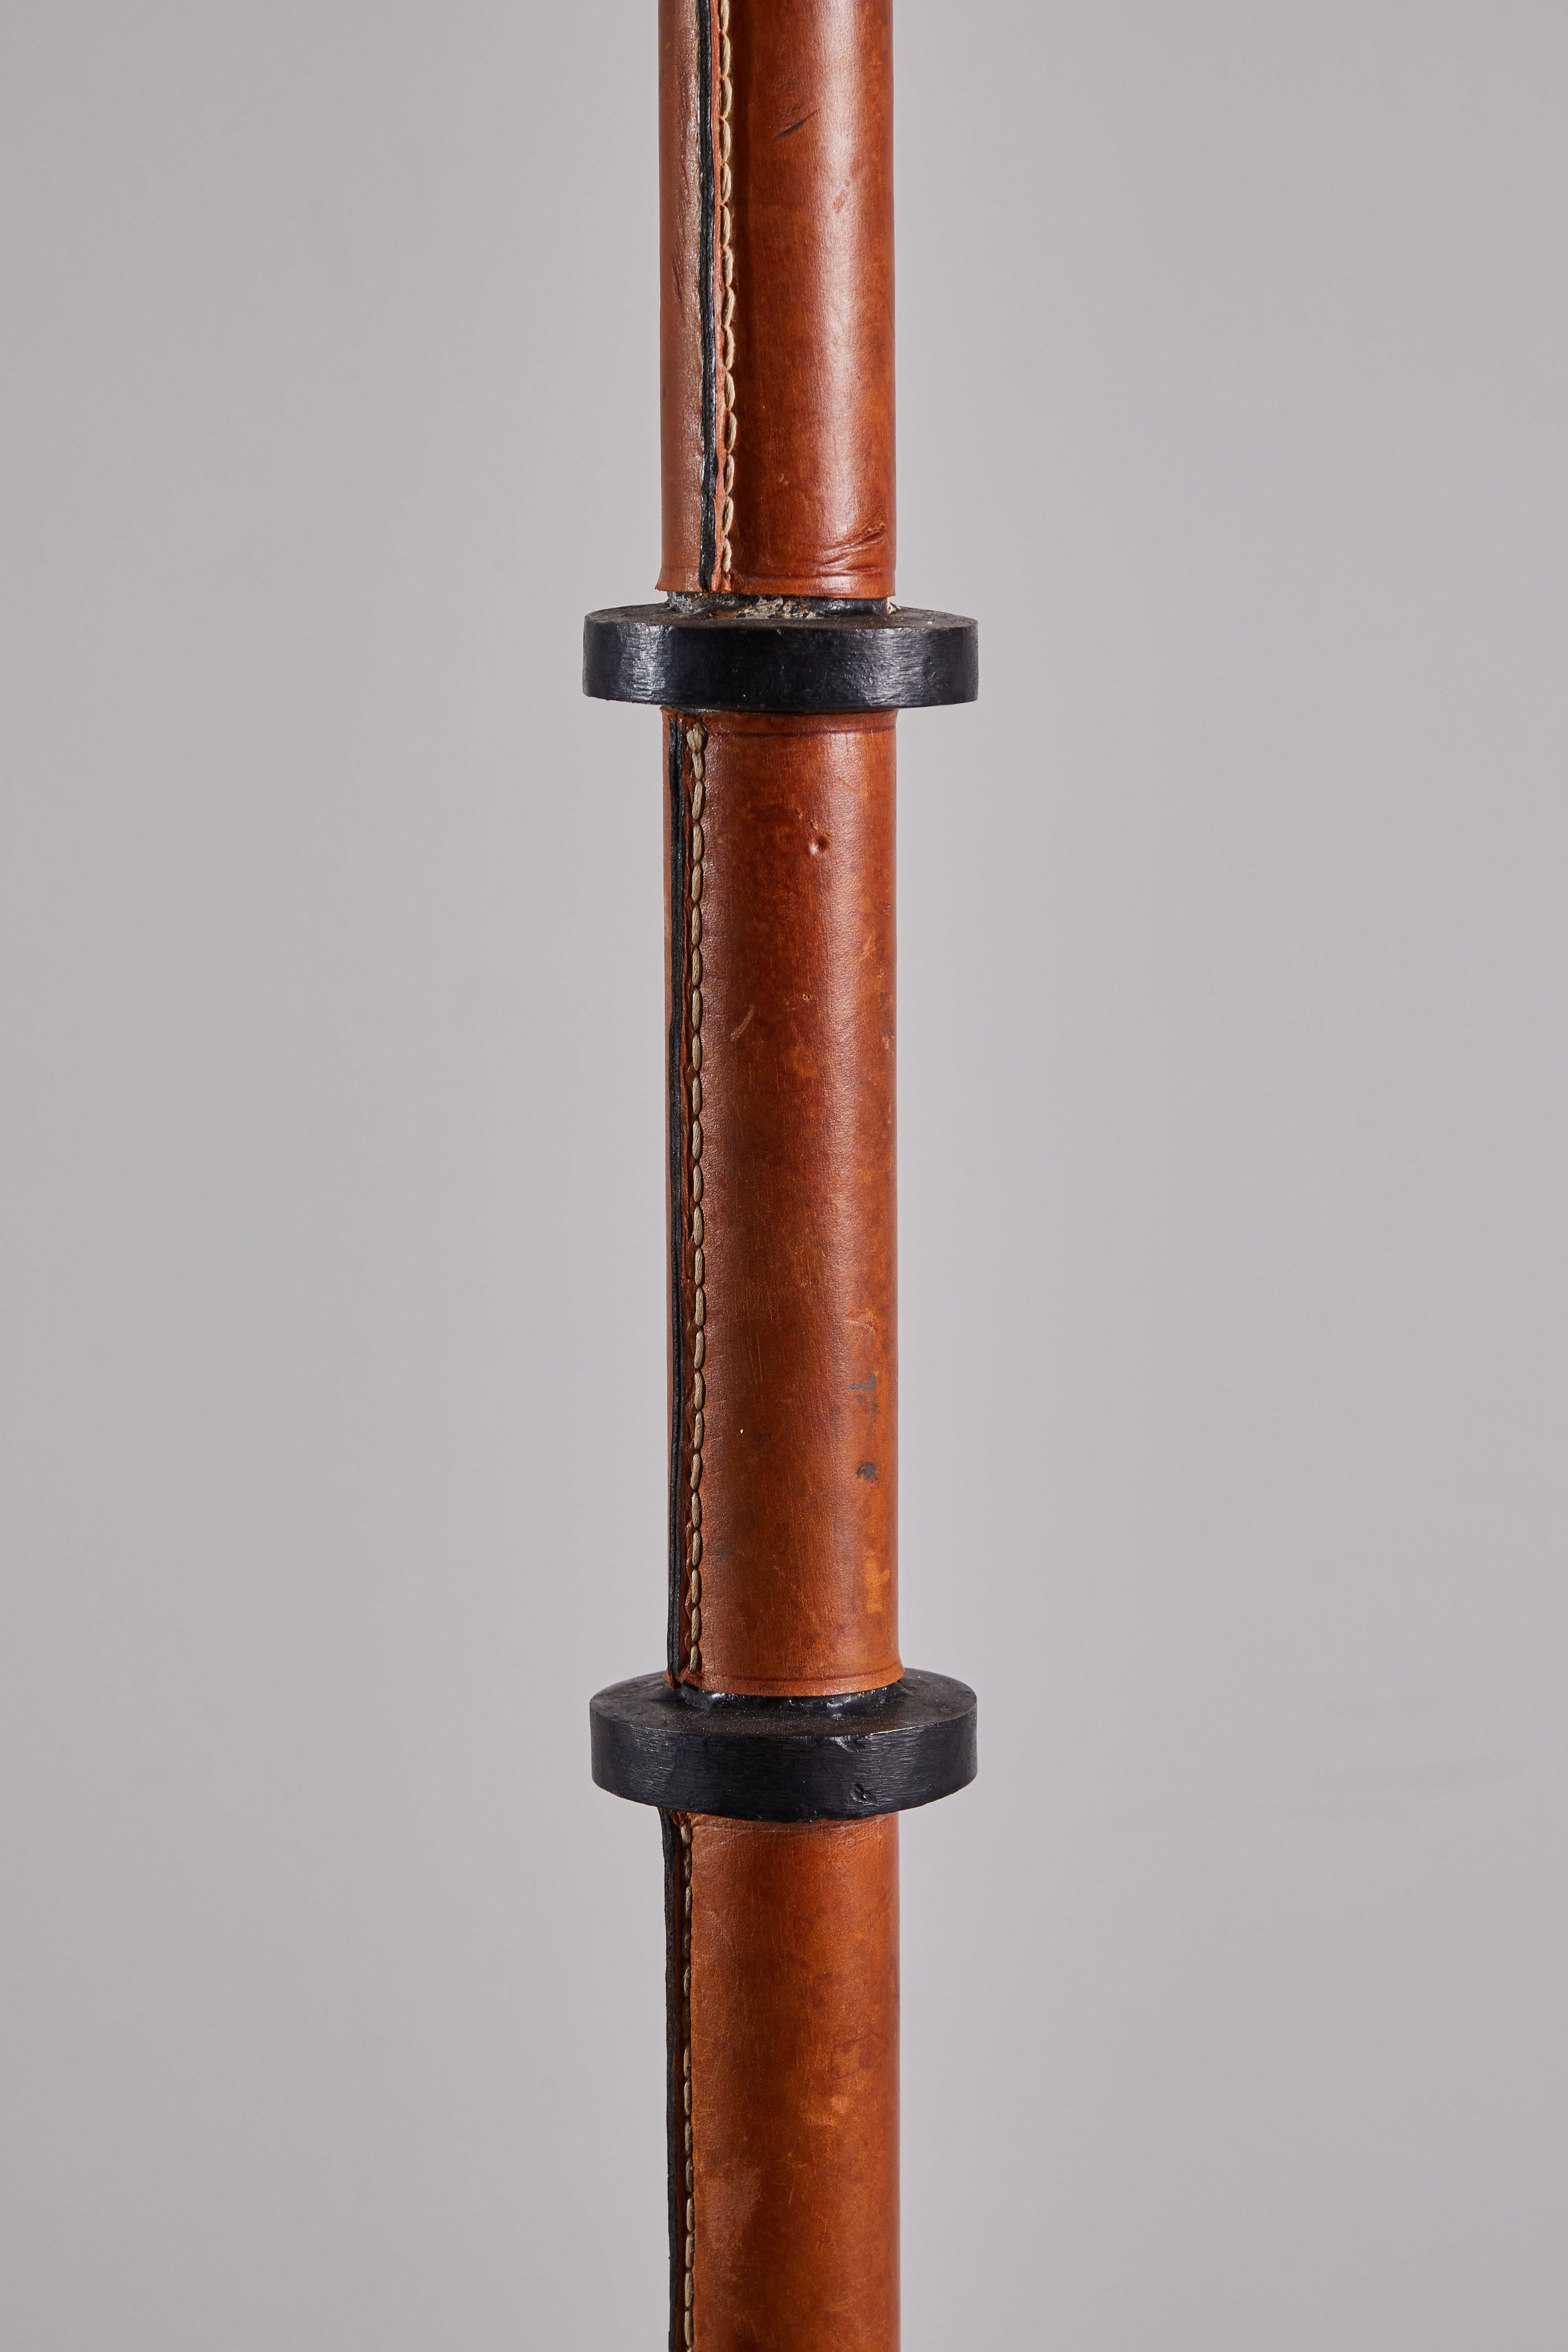 Leather Rare Floor Lamp in the Style of Jacques Adnet